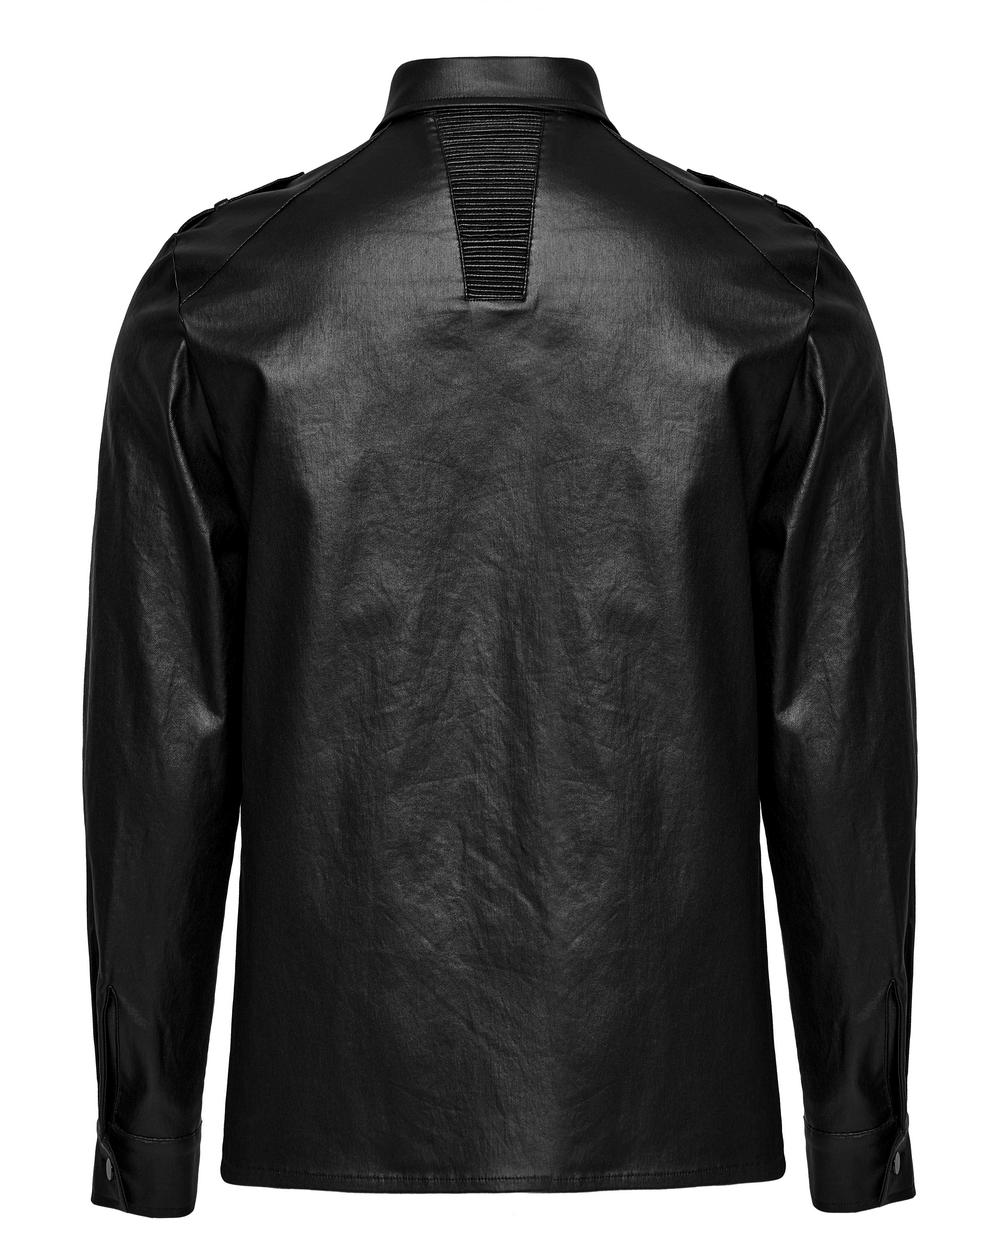 Men's Punk Style Leather Shirt with Zip Details